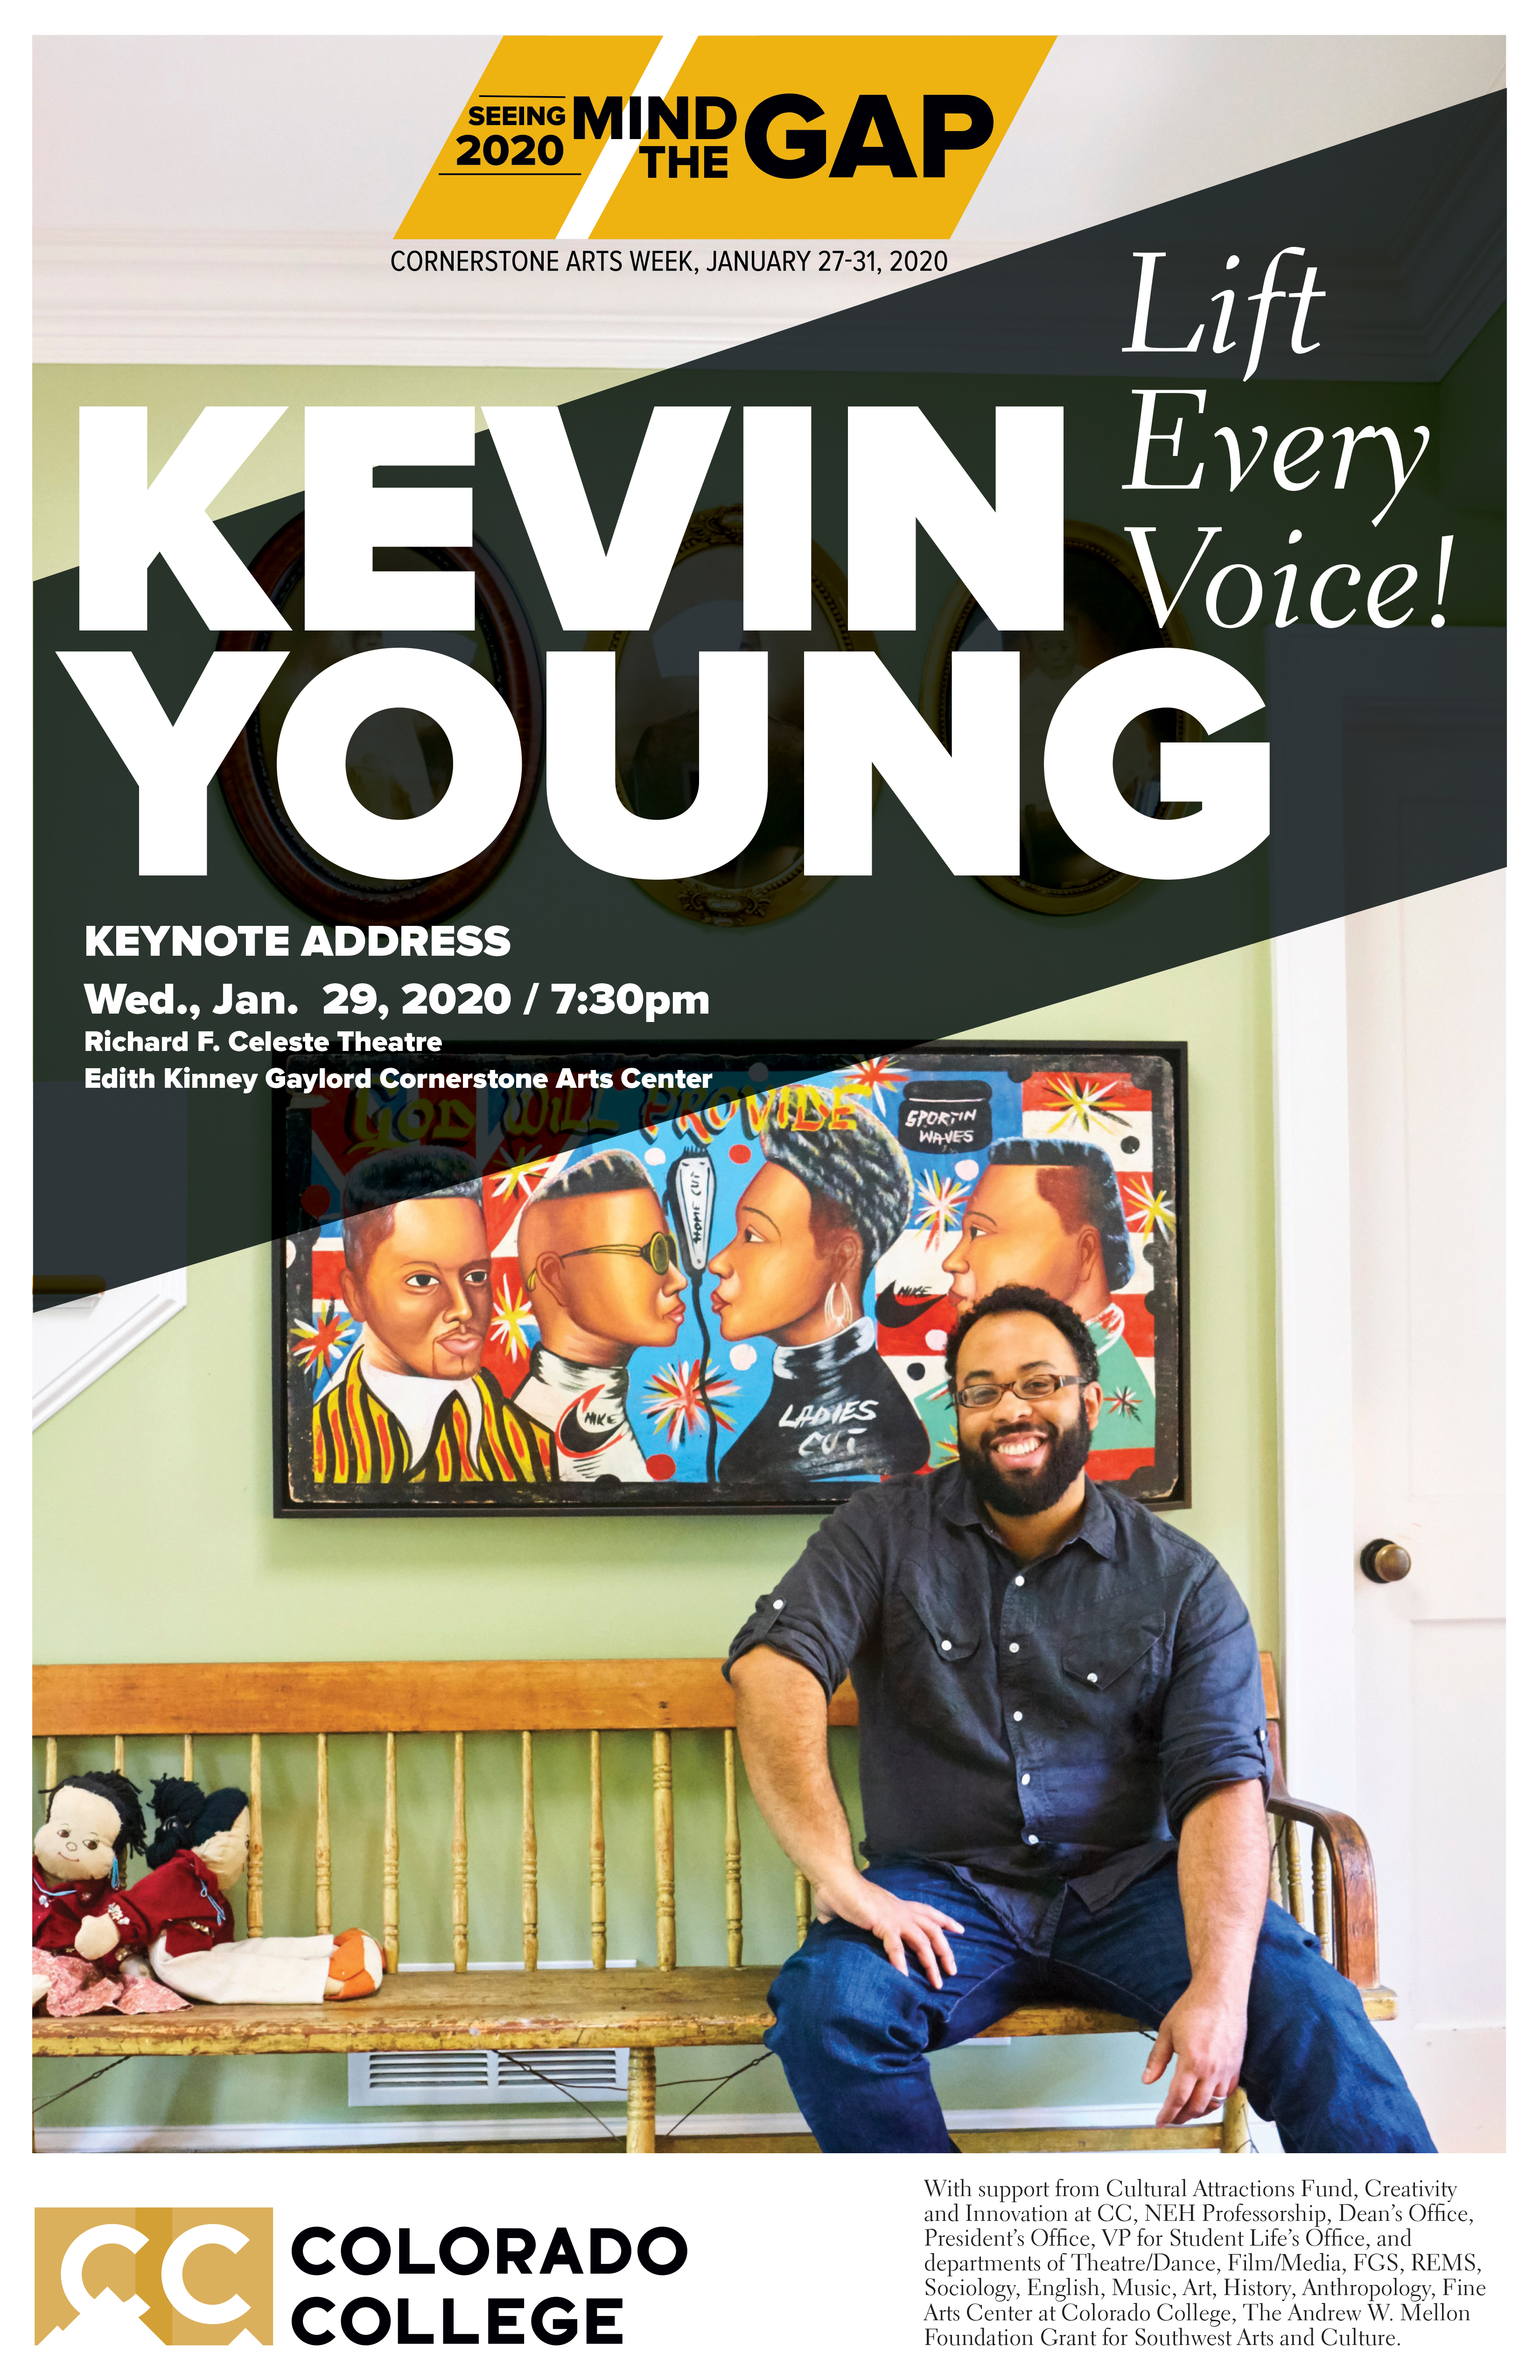 CC_Kevin-Young-Poster-11x17_v3